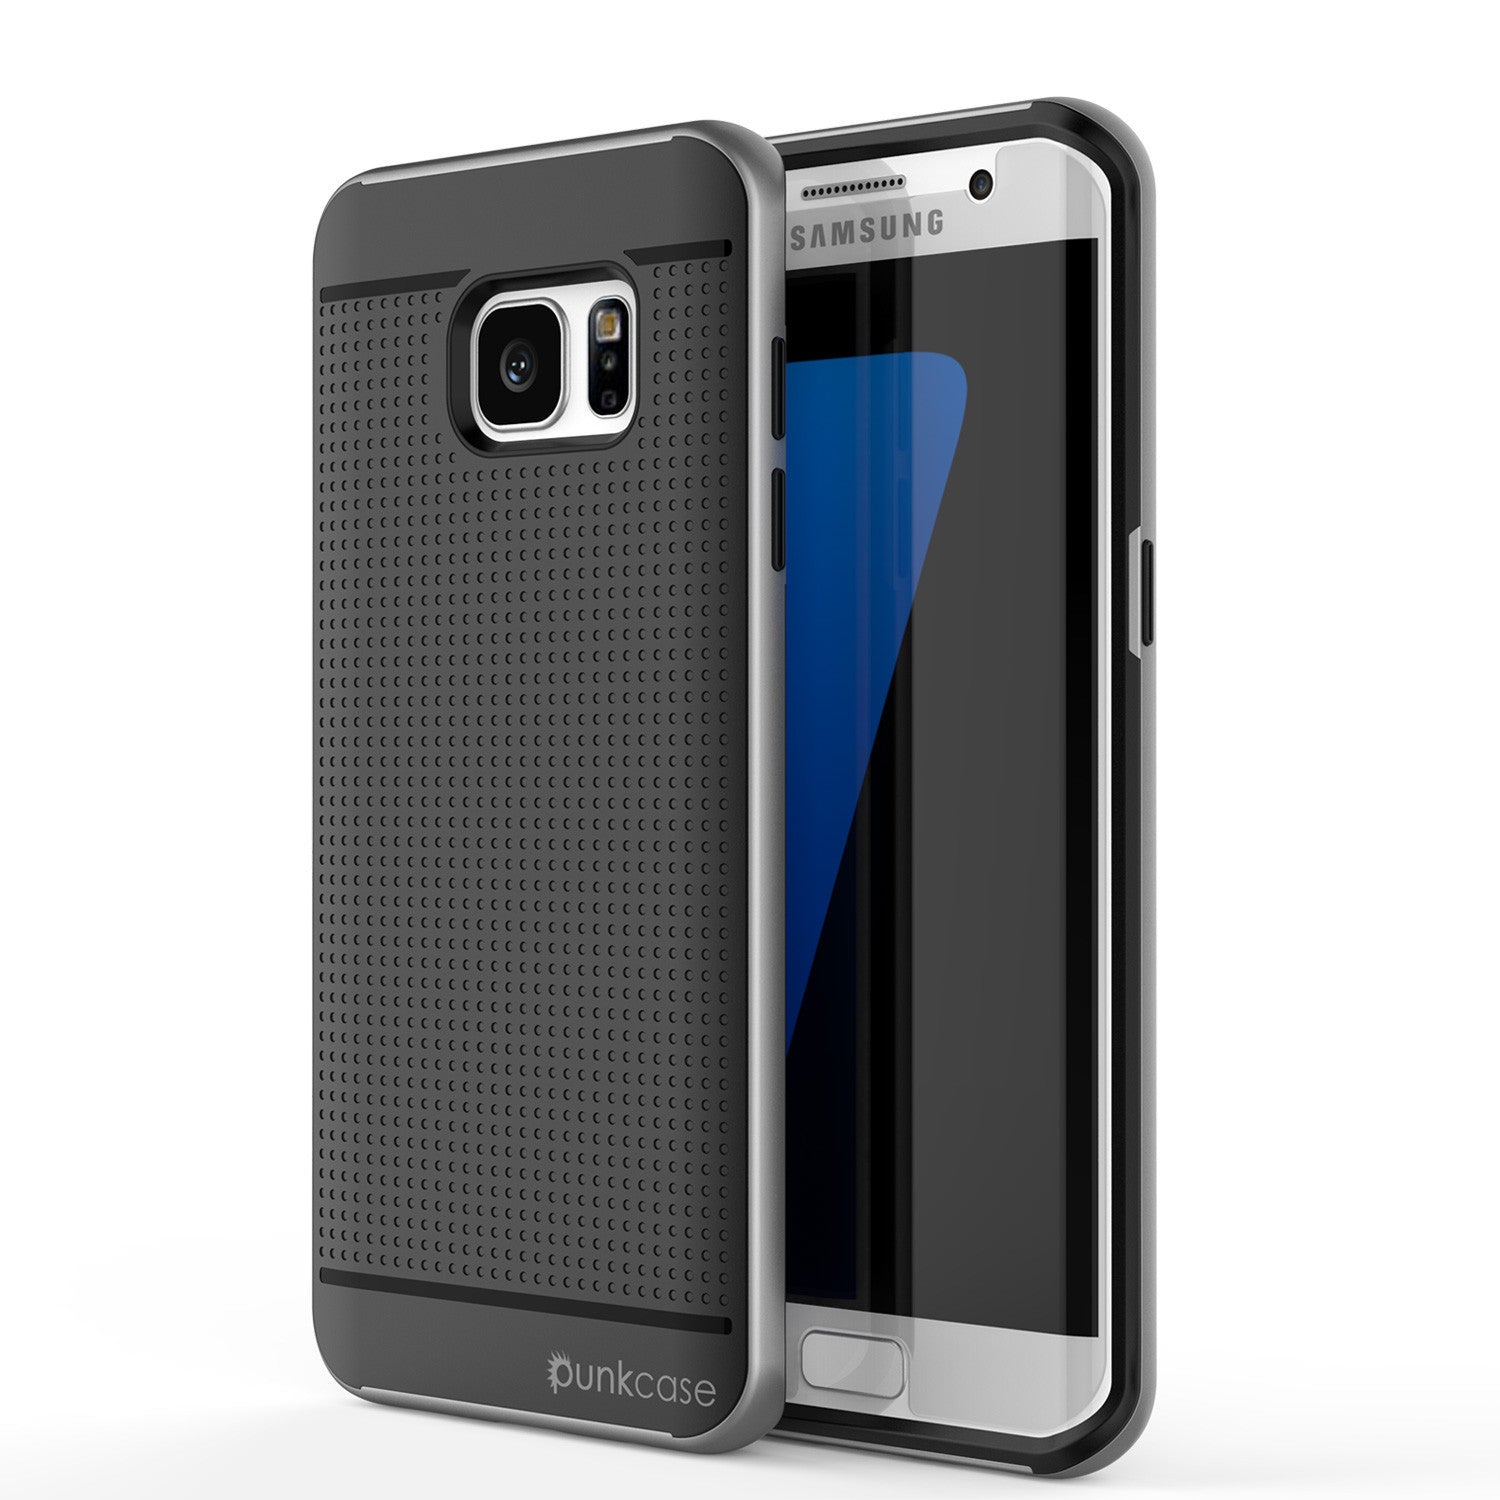 Galaxy S7 Edge Case, PunkCase STEALTH Grey Series Hybrid 3-Piece Shockproof Dual Layer Cover (Color in image: Grey)